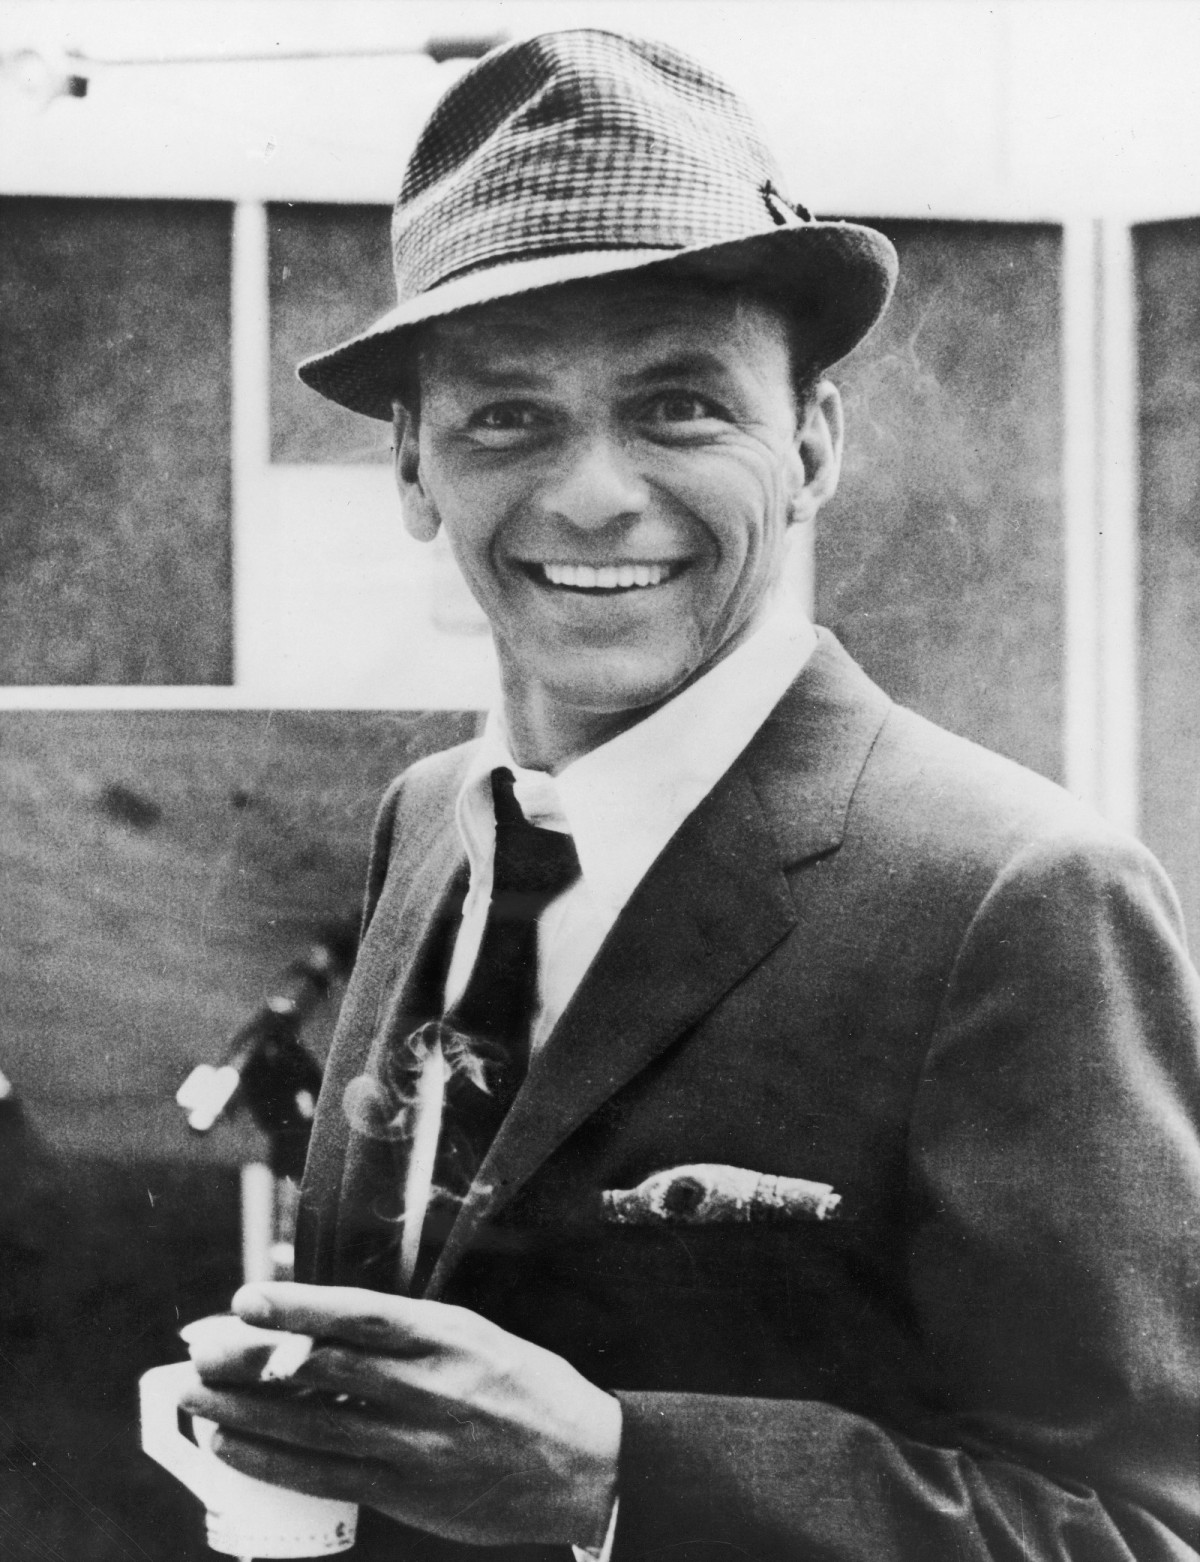 American singer and actor Frank Sinatra (1915 - 1998) smiles while holding a cigarette and a cup of coffee in a recording studio, 1950s. (Photo by Hulton Archive/Getty Images)